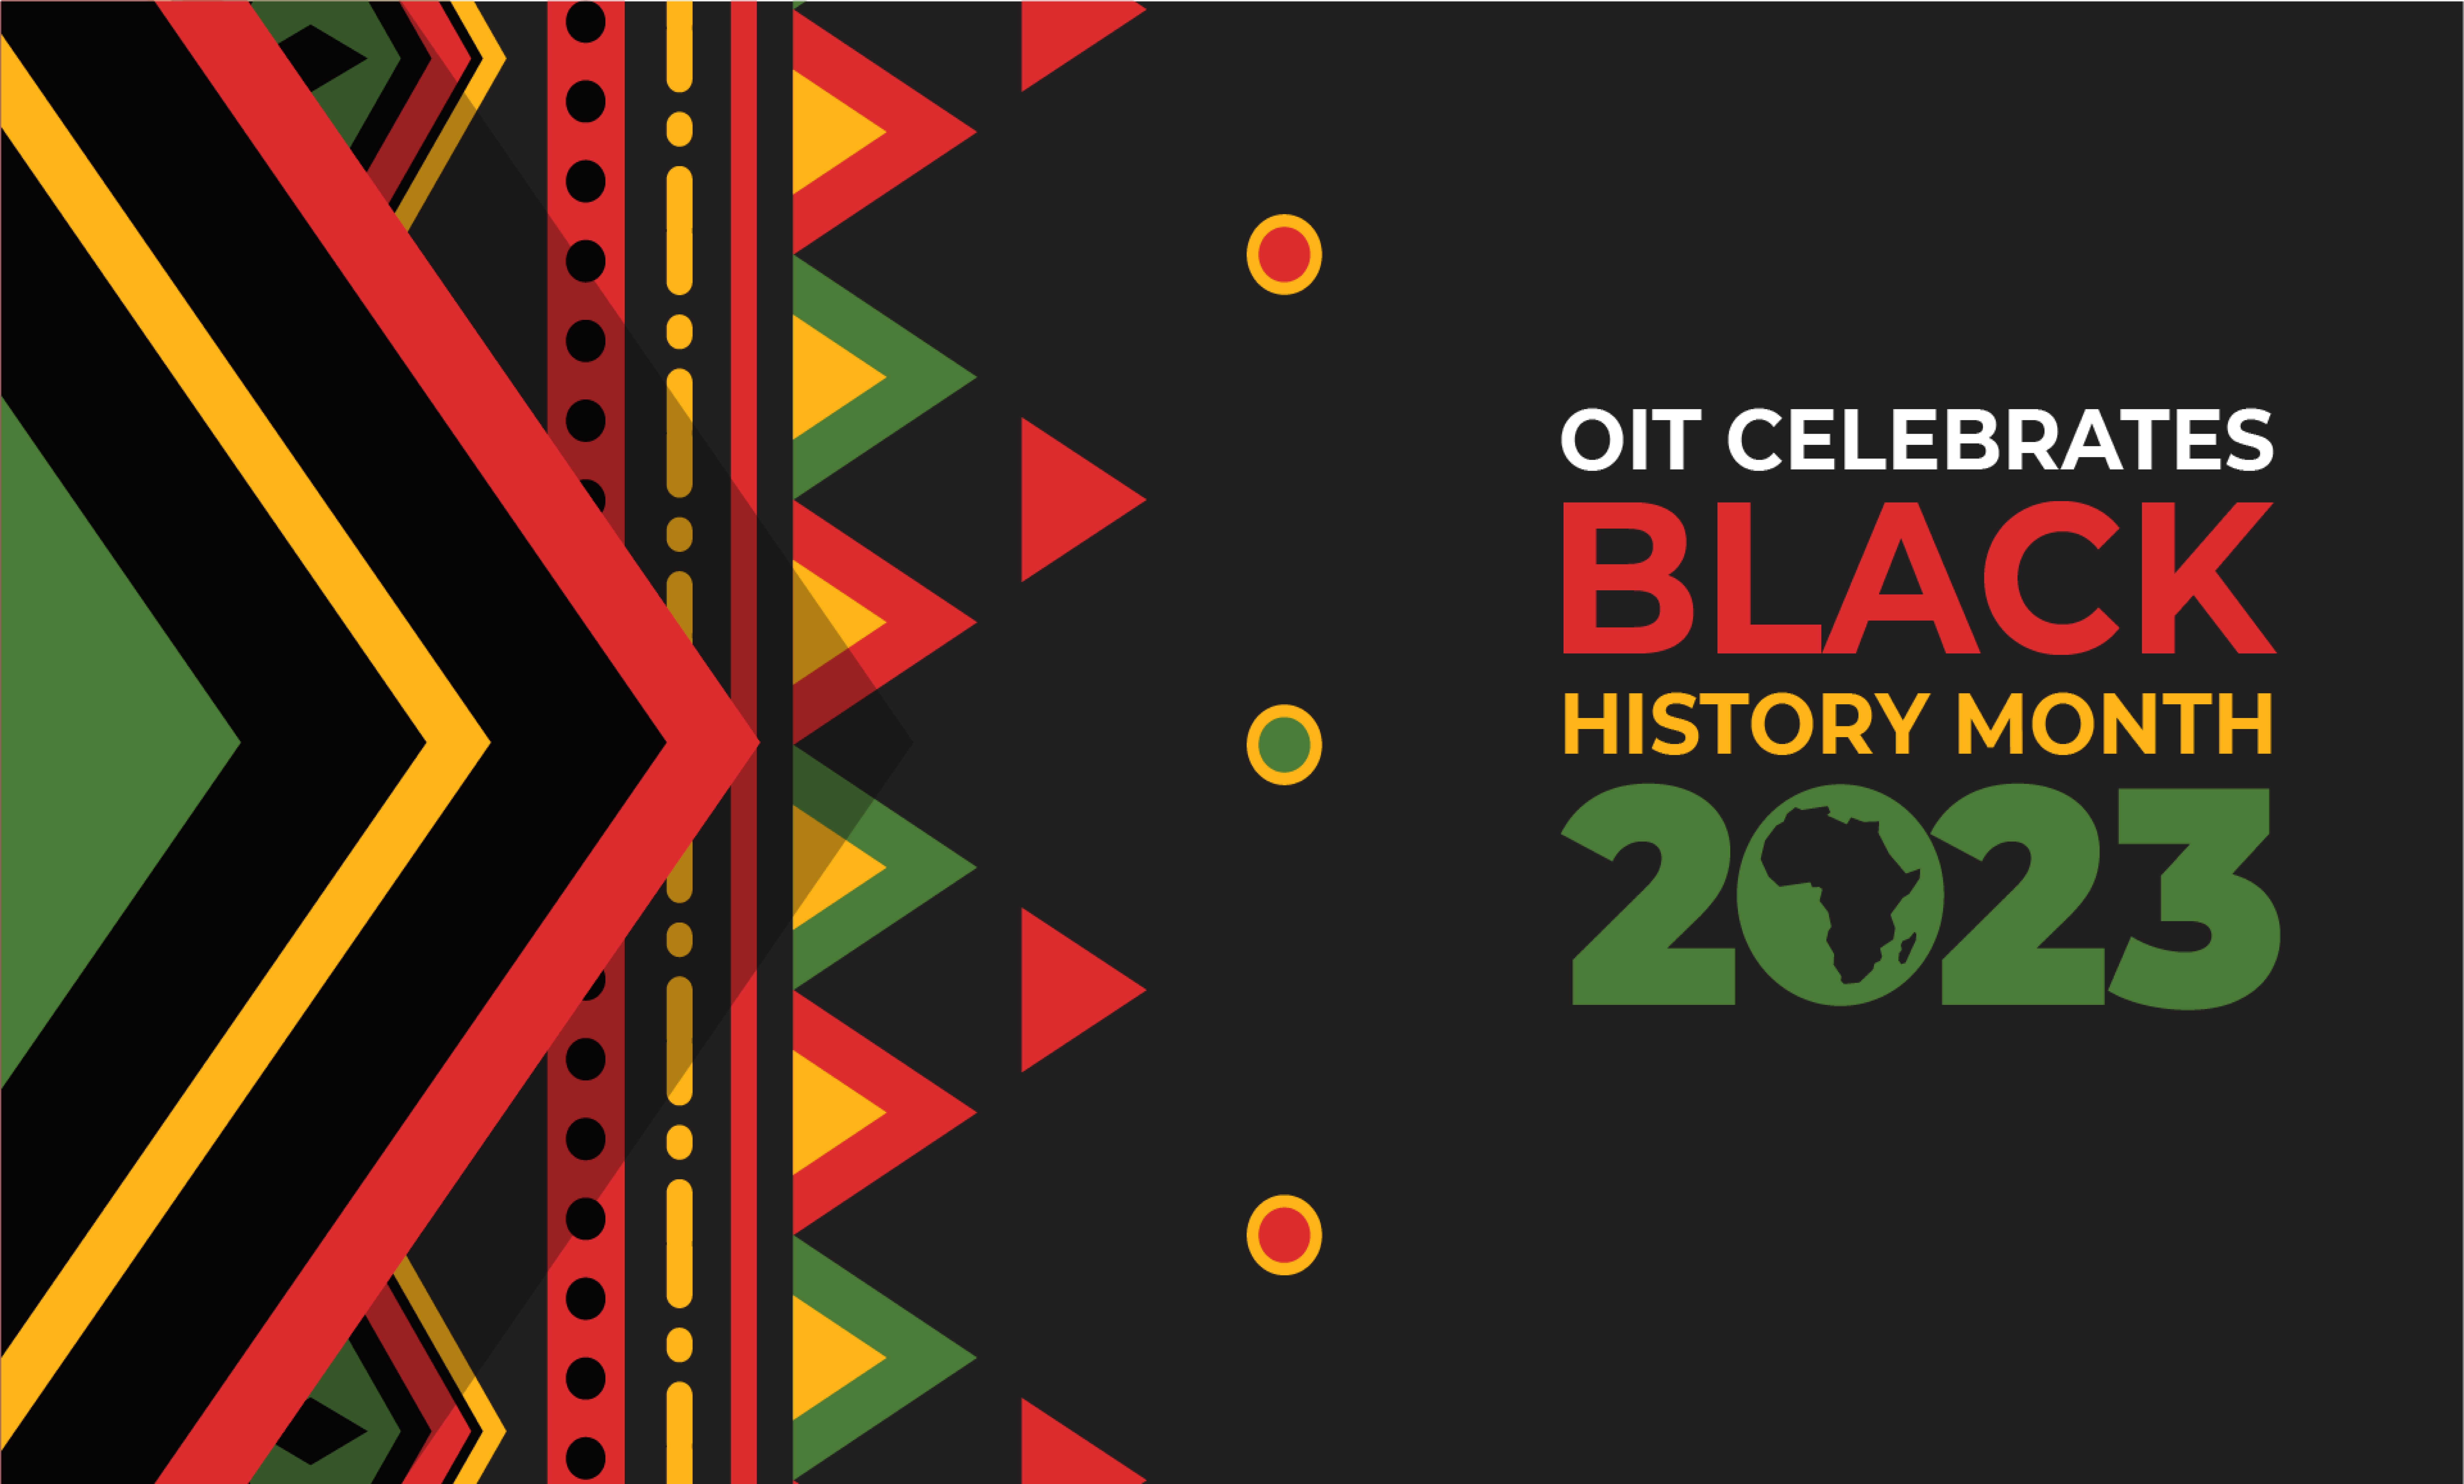 Graphic with African-inspired red, green, and gold pattern with text "OIT Celebrates Black History Month 2023"